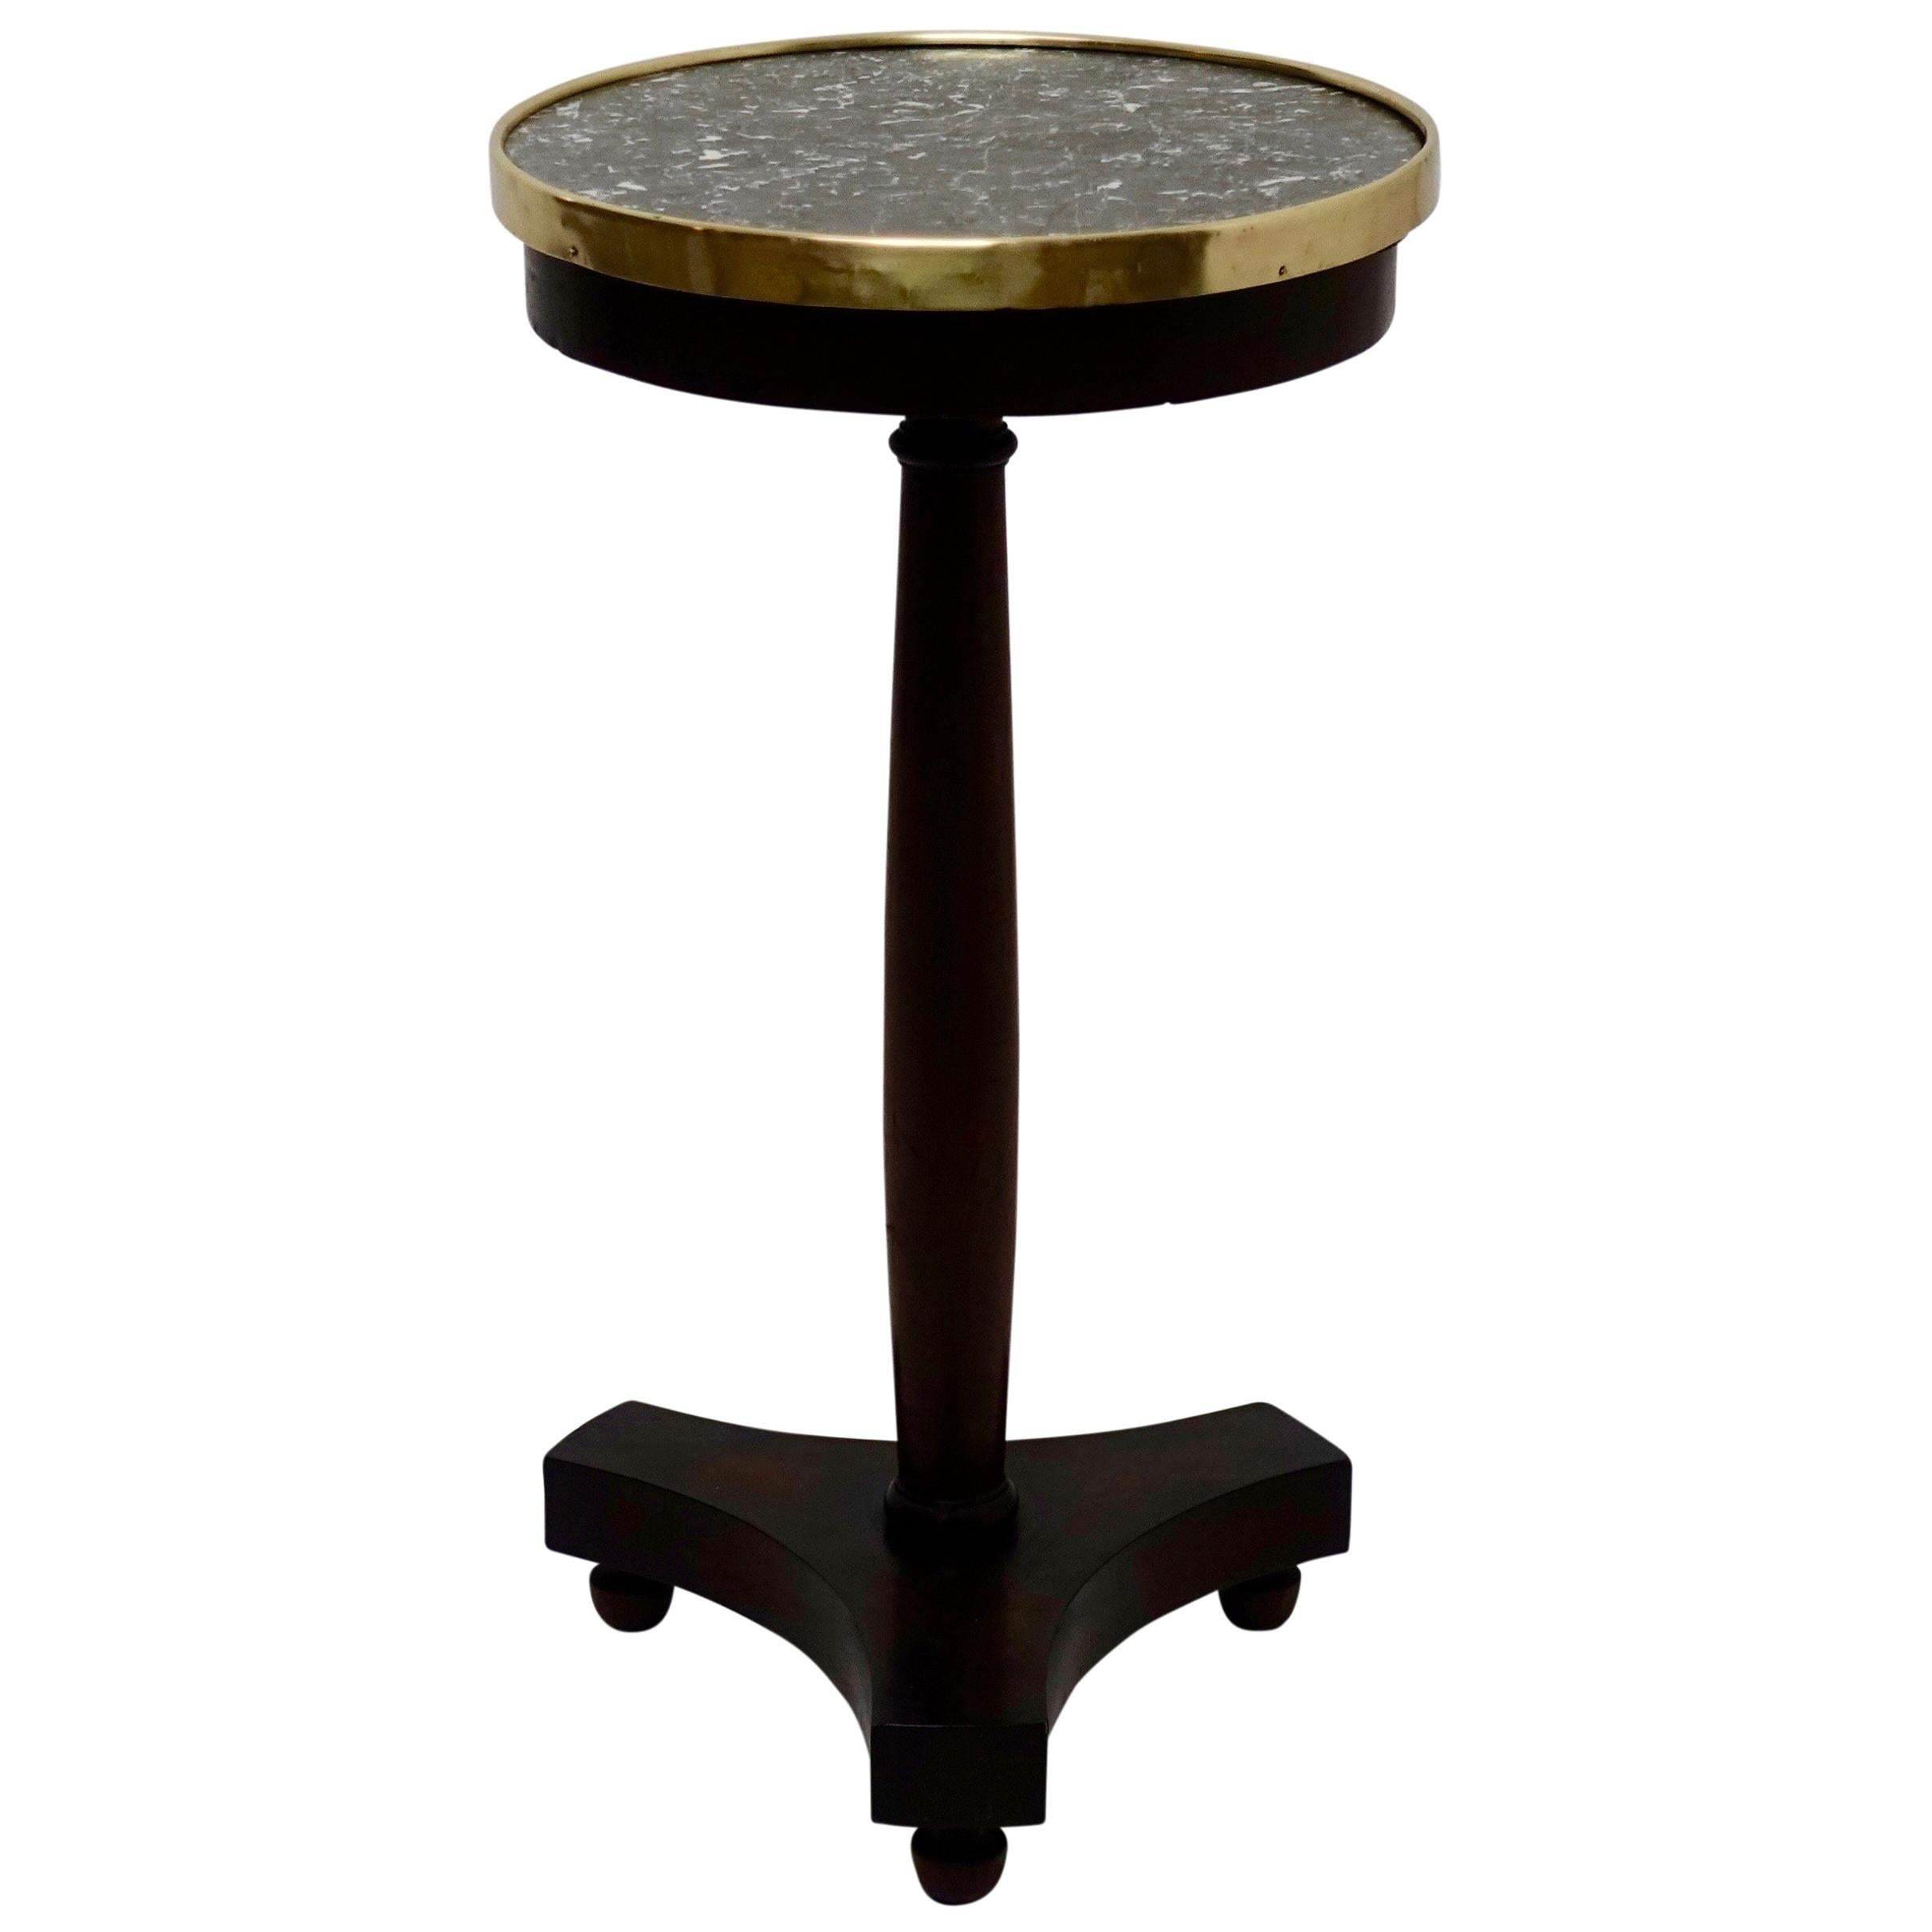 French Empire Style Mahogany and Marble Candle Stand Side Table, circa 1840